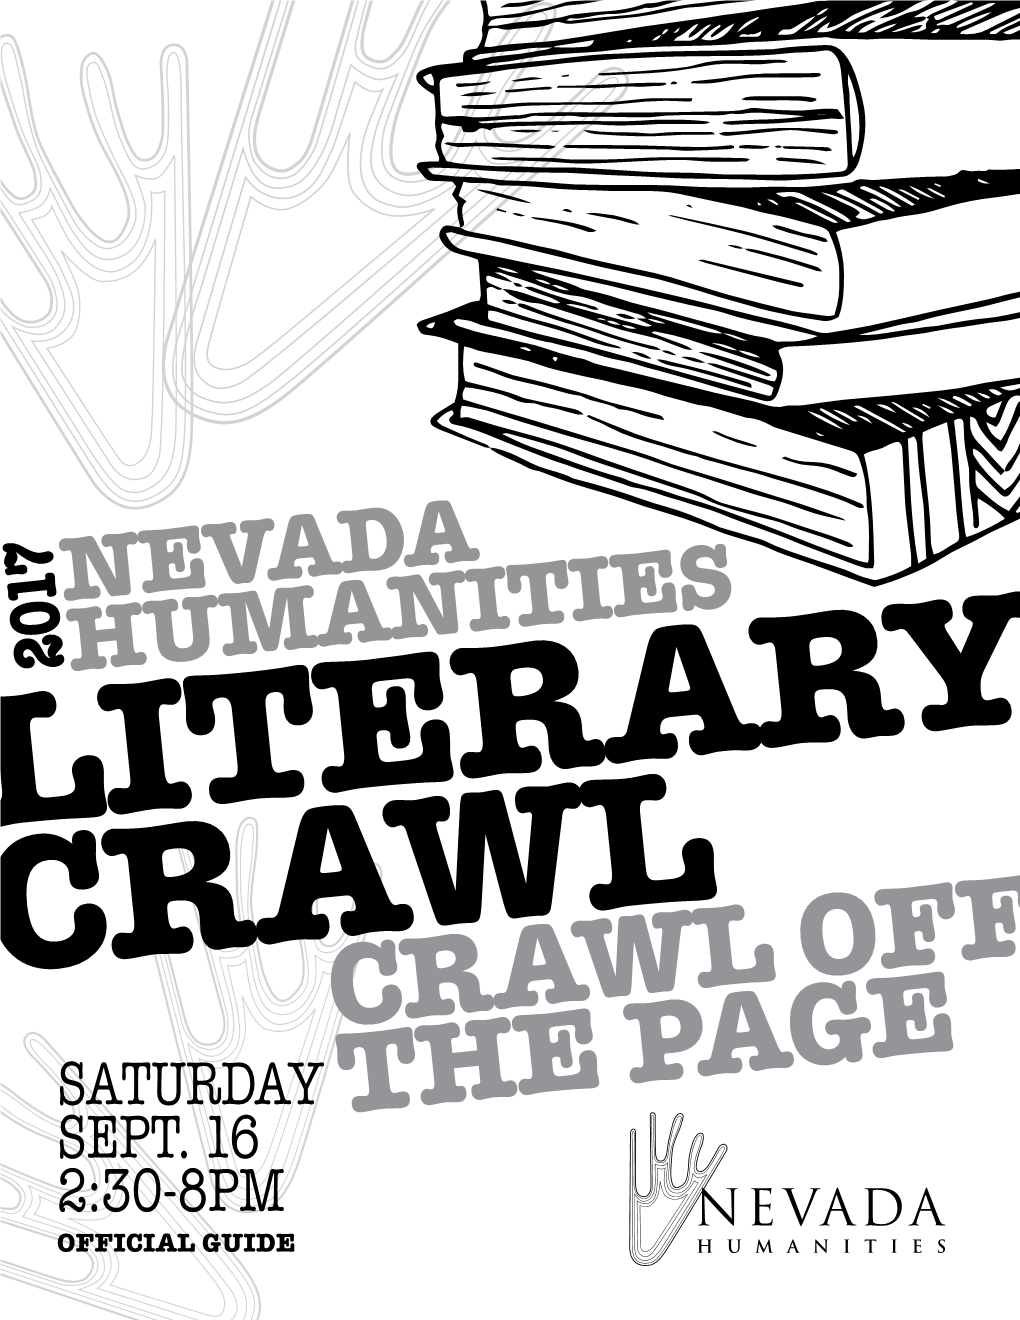 SATURDAY SEPT. 16 2:30-8PM OFFICIAL GUIDE ABOUT NEVADA HUMANITIES Nevada Humanities Fosters Cultural Icons to Look For